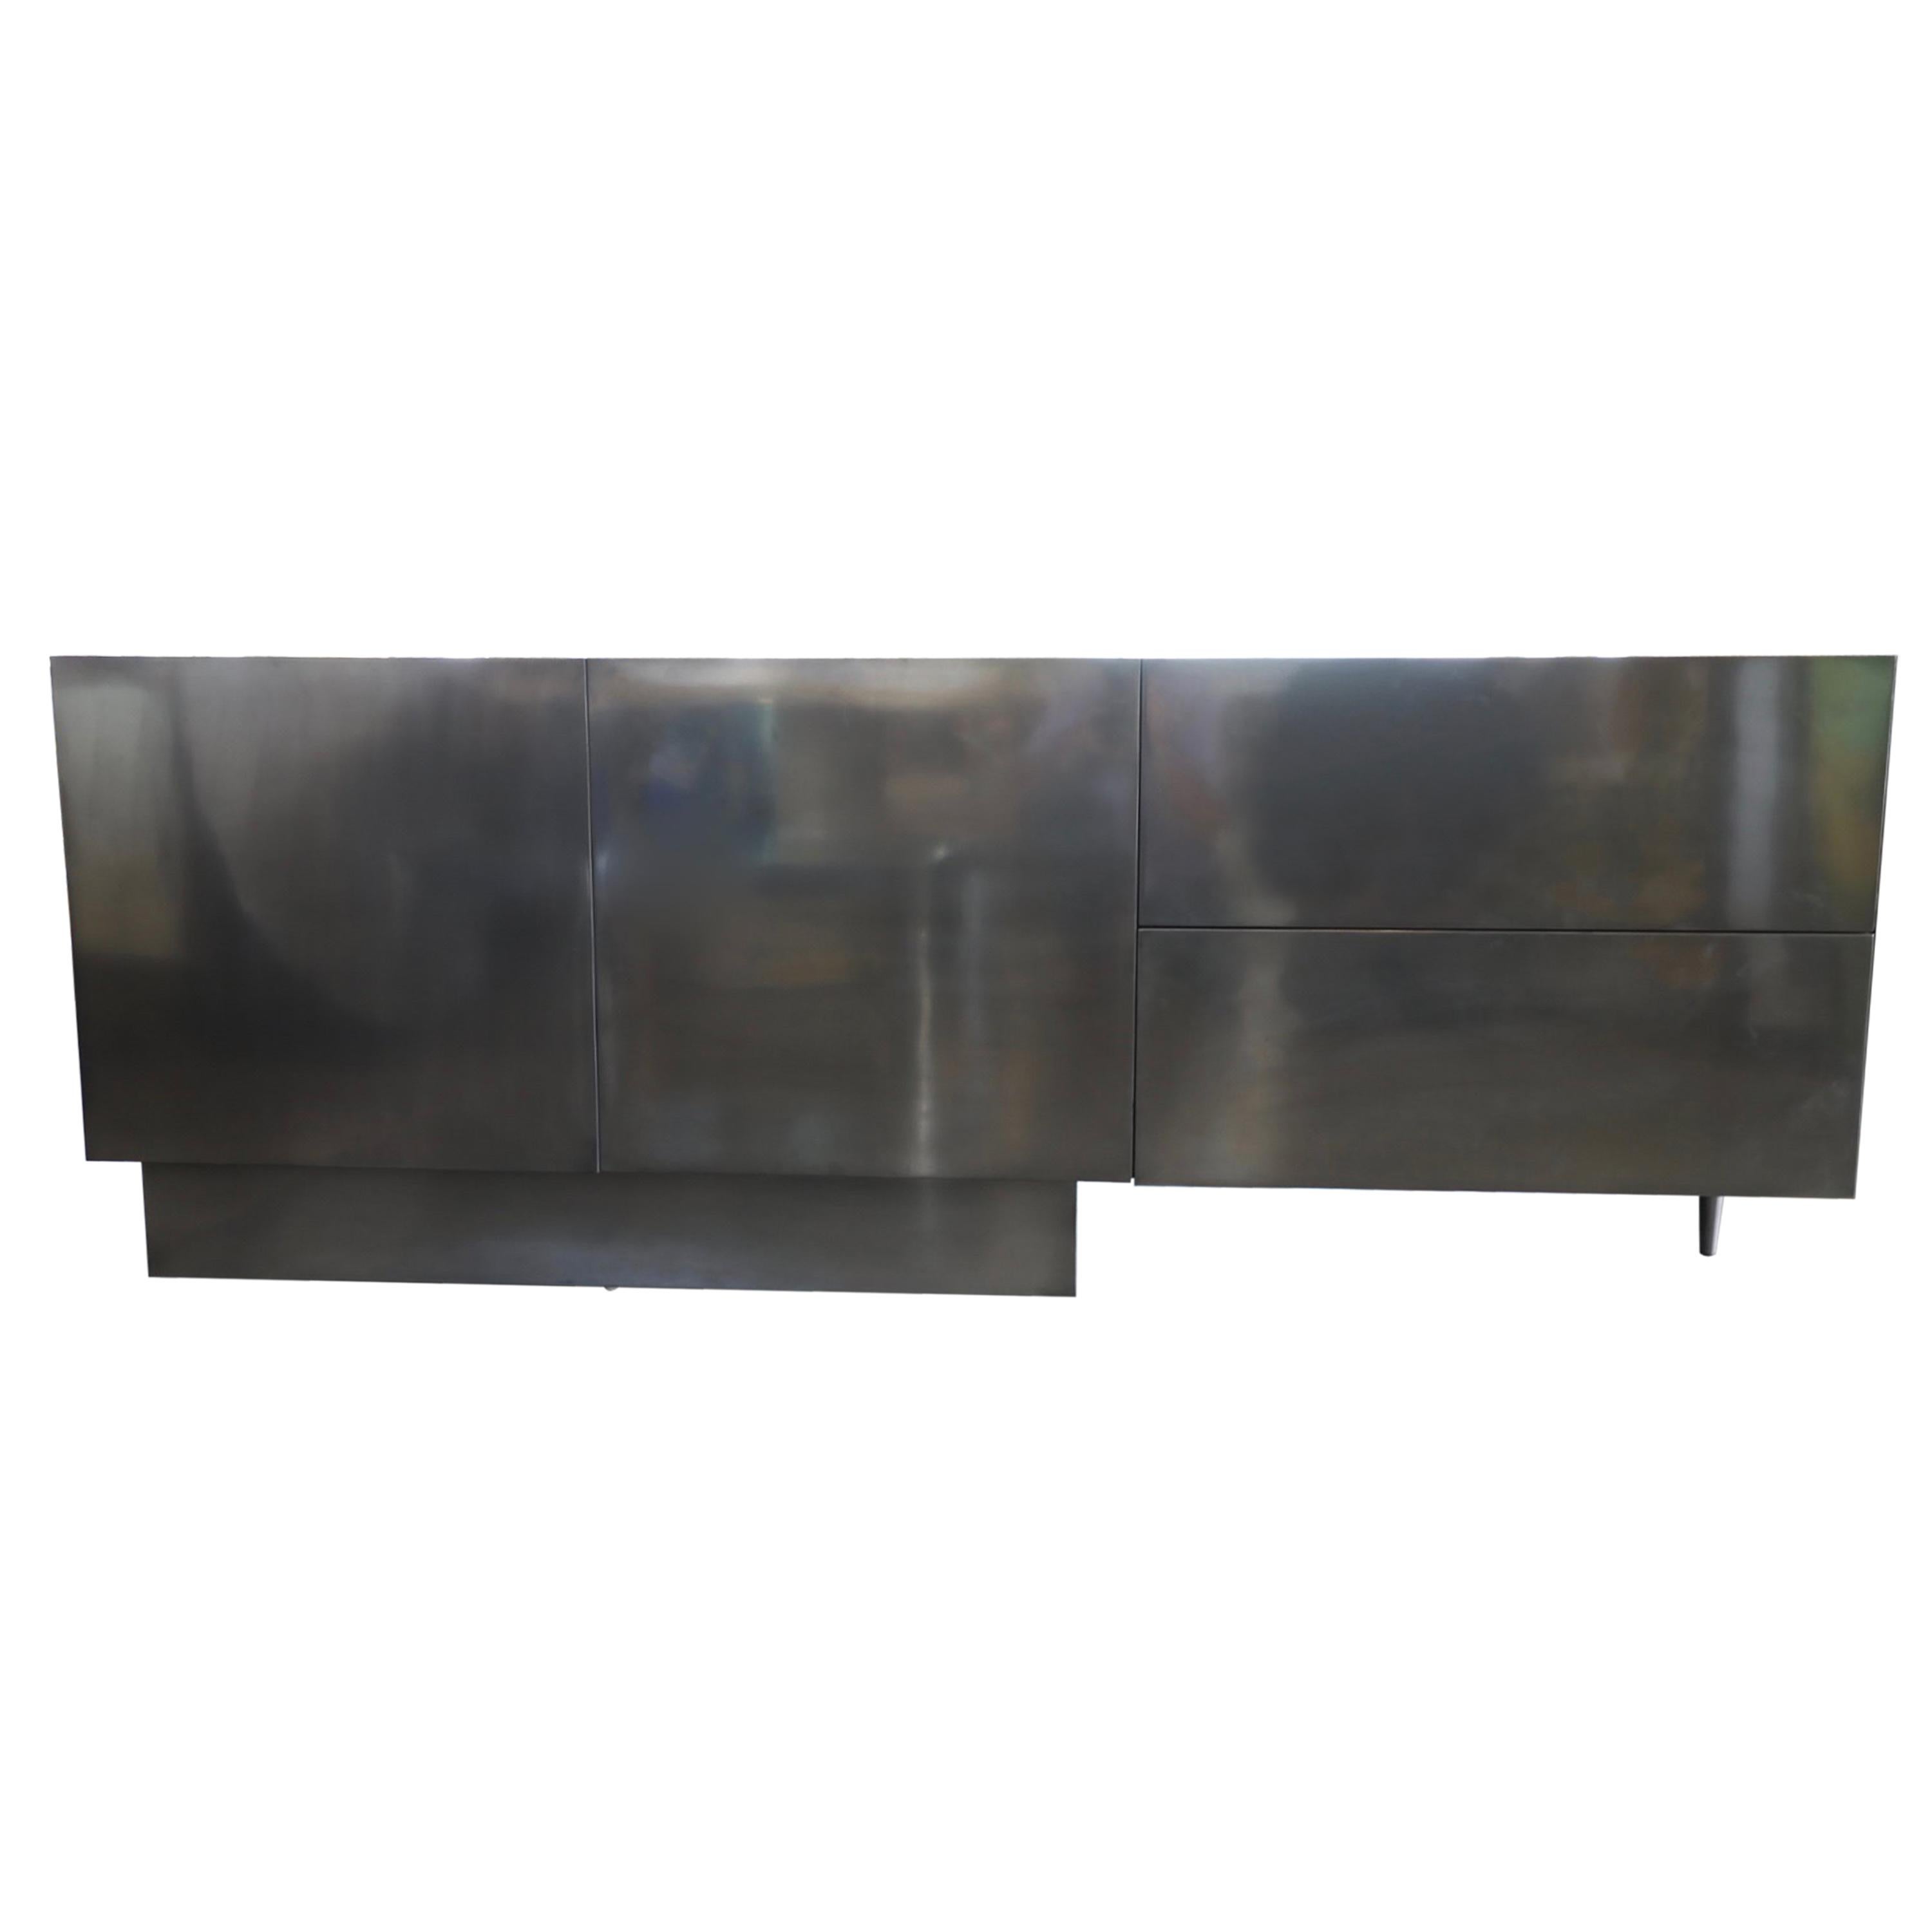 Asymmetric One Leg Credenza in Stainless Steel and Wood